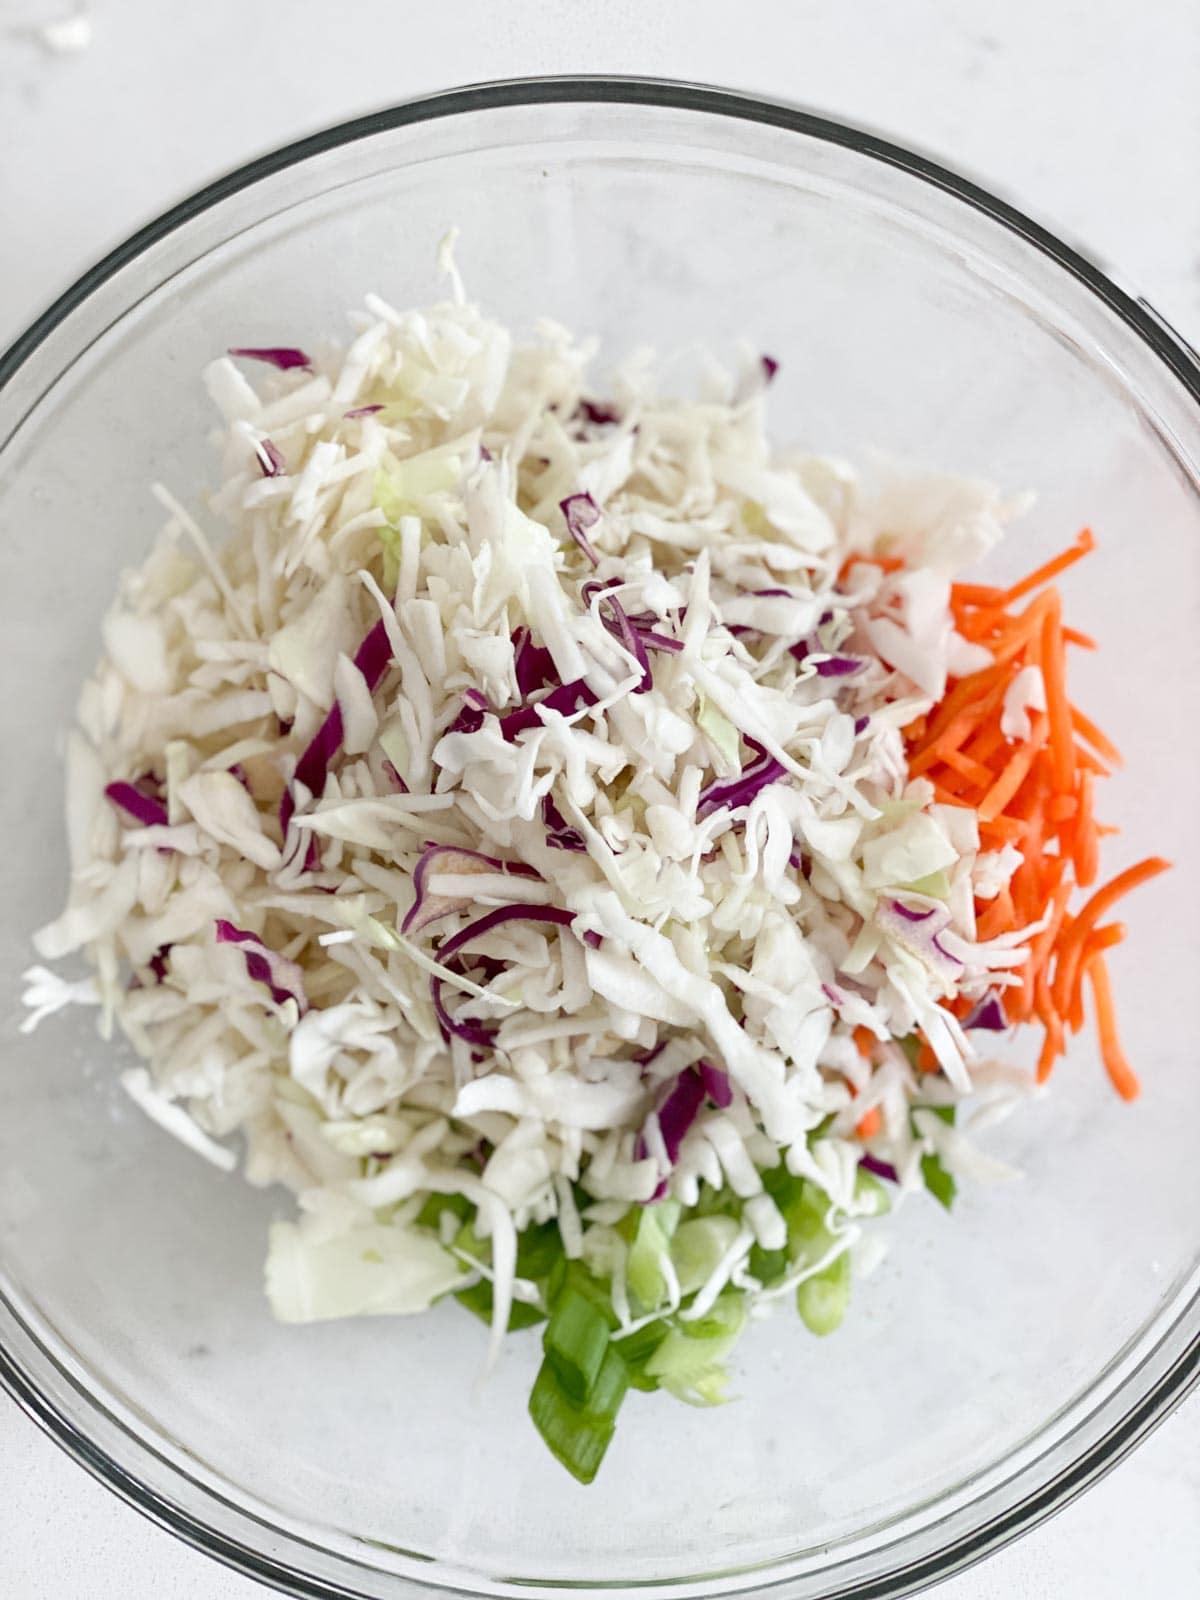 Cabbage, carrots, and green onion added to a coleslaw dressing mixture.